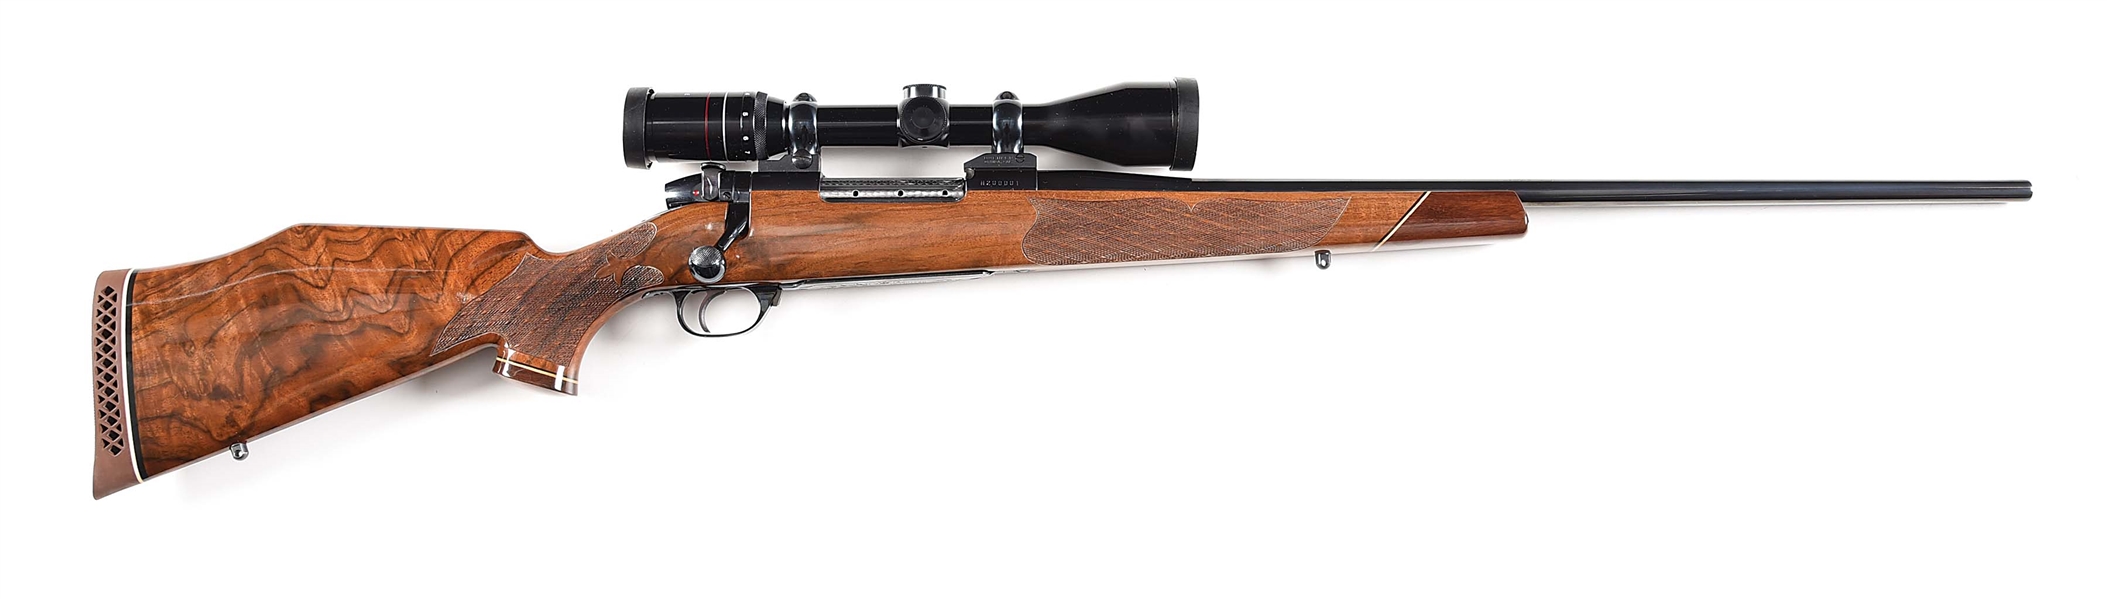 (M) WEATHERBY MARK V BOLT ACTION RIFLE IN .240 WEATHERBY MAGNUM.